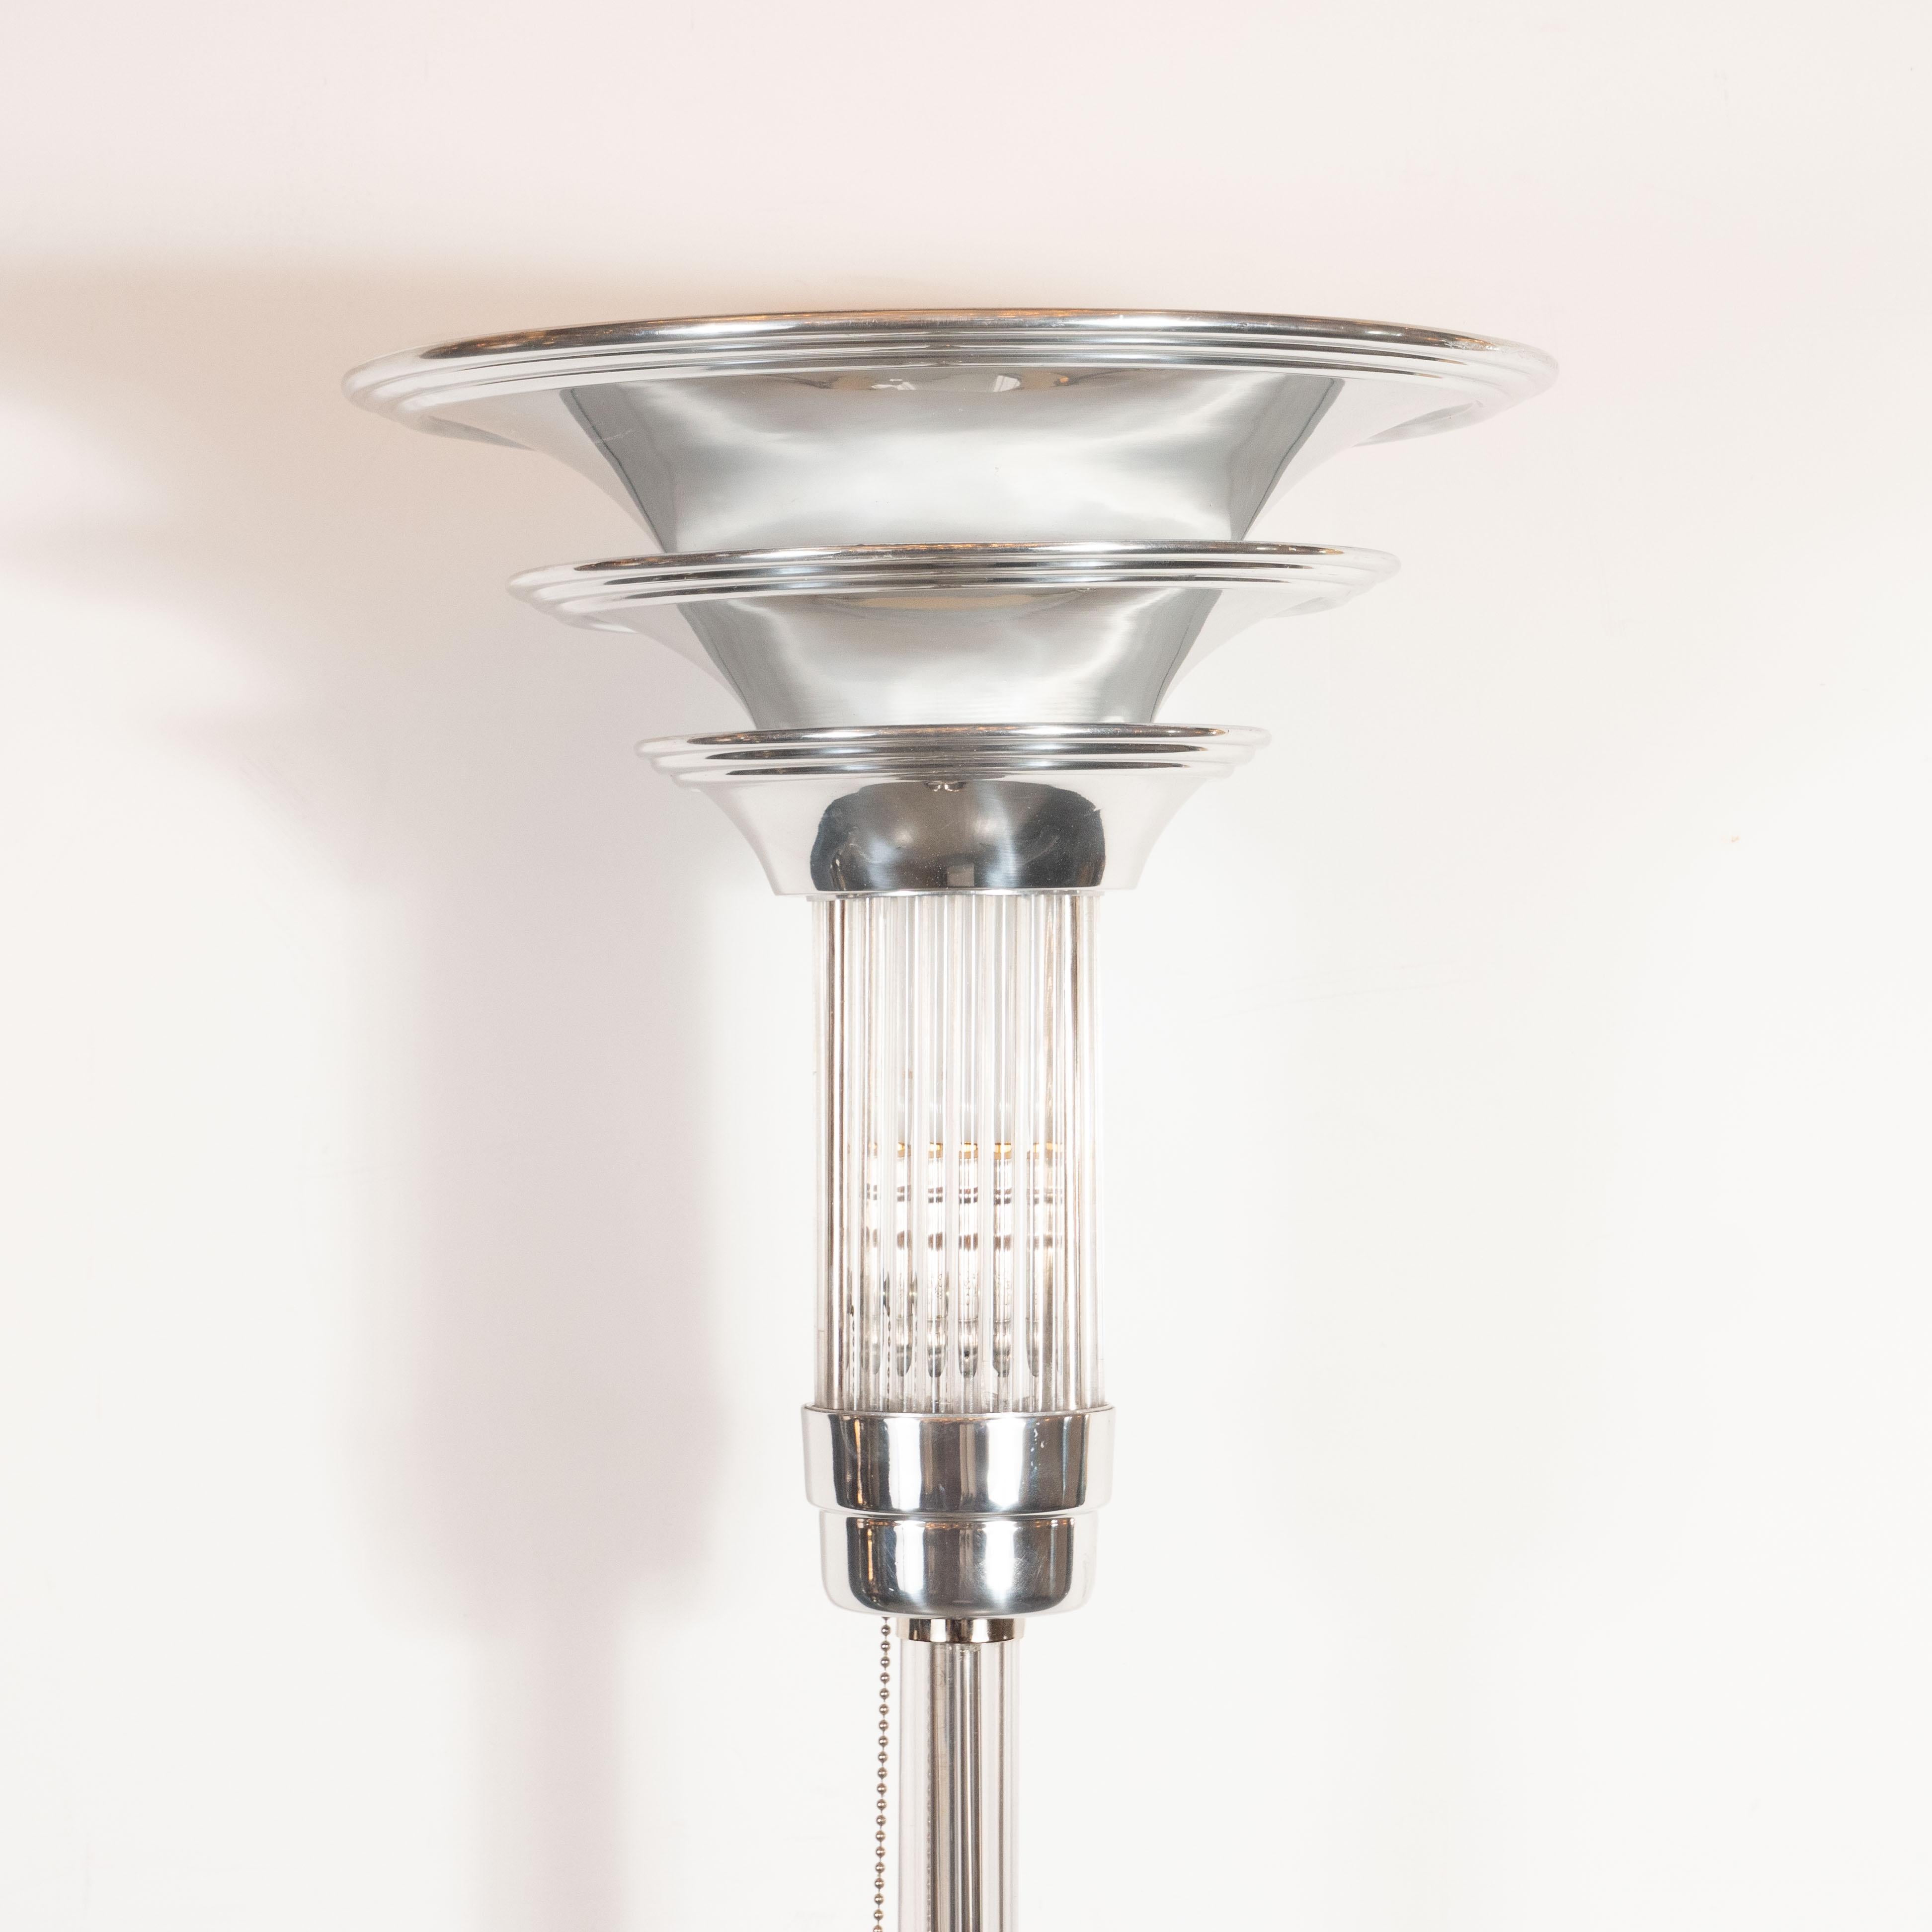 This sophisticated Art Deco Machine Age torchiere was realized in the United States, circa 1935. It features a circular base from which a cylindrical rod- all in polished nickel- ascends culminating in a dramatic skyscraper style shade consisting of